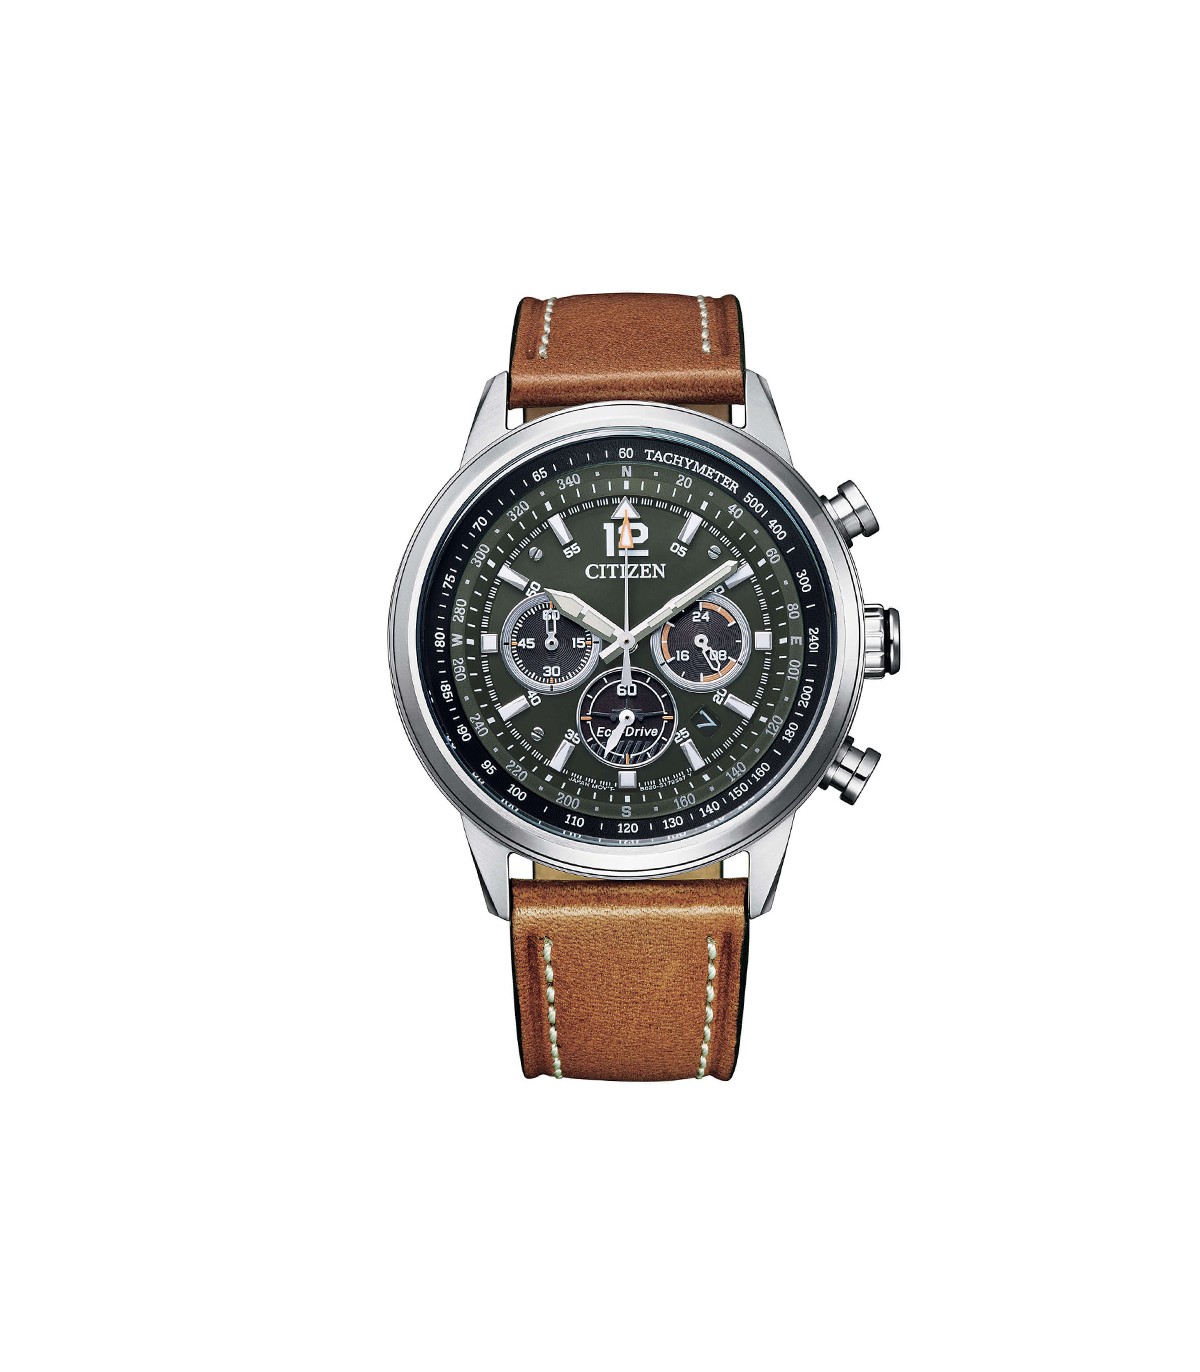 Citizen Men's Watch - Of Collection Aviator Chrono Eco-Drive 44mm Green - 0